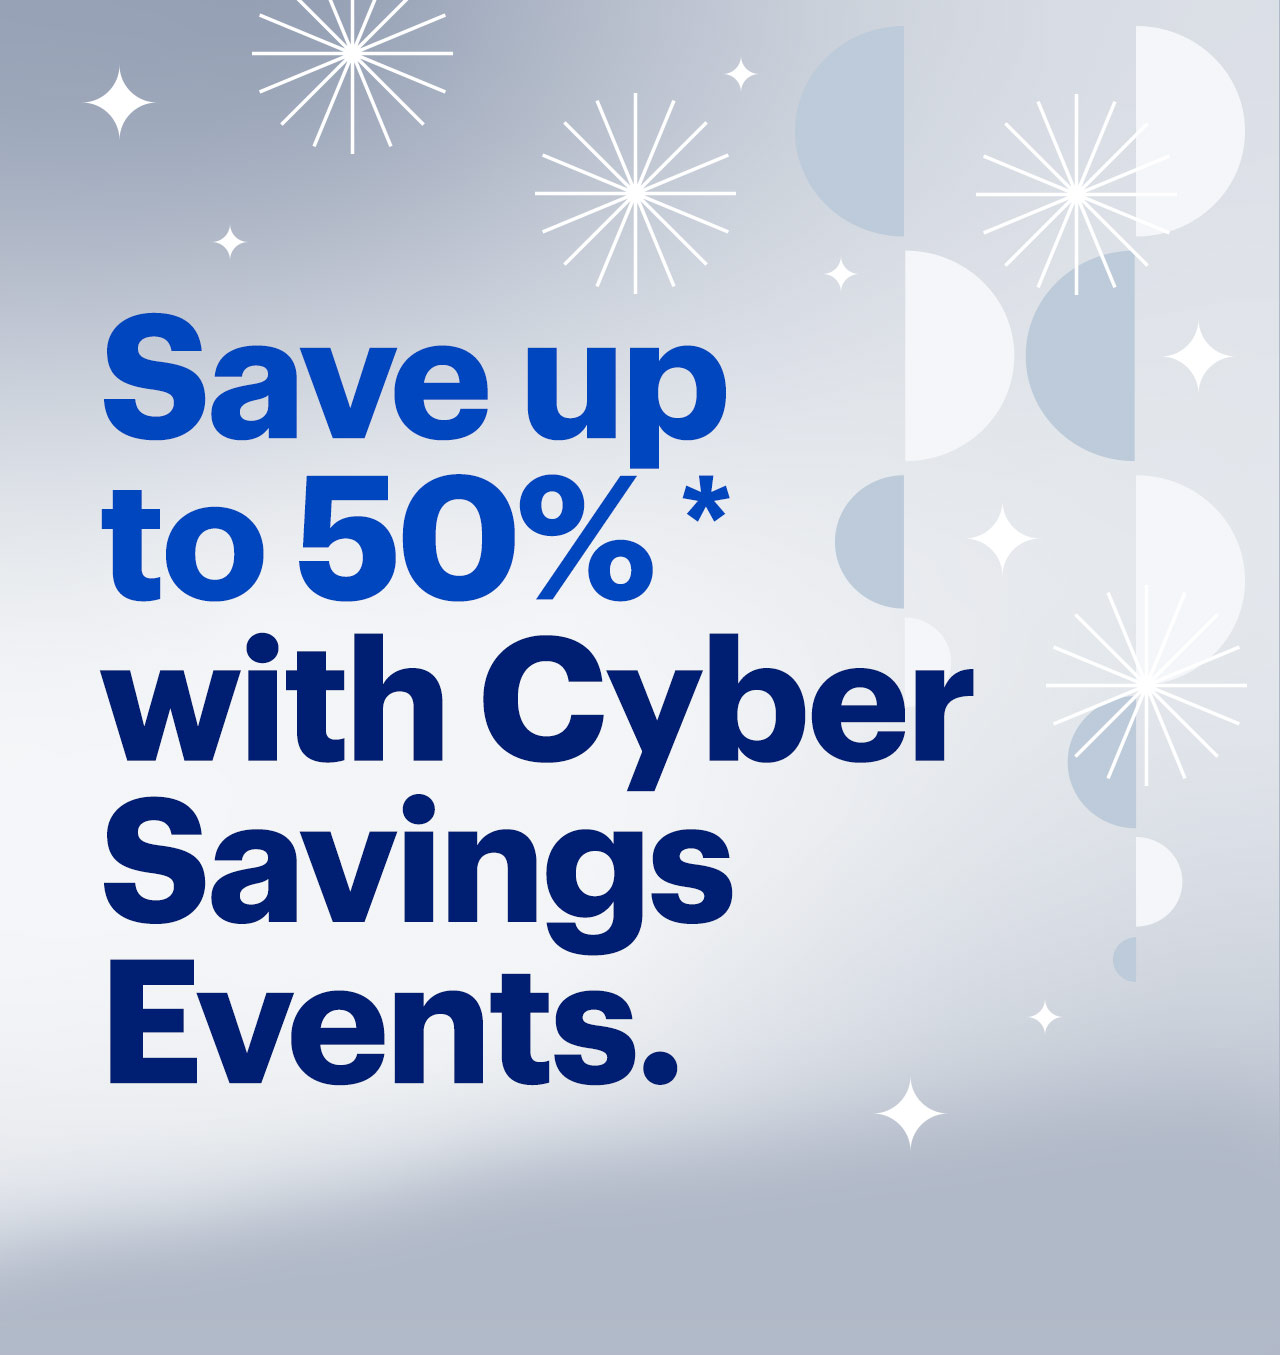 Save up to 50% with Cyber Savings Events. Reference disclaimer.